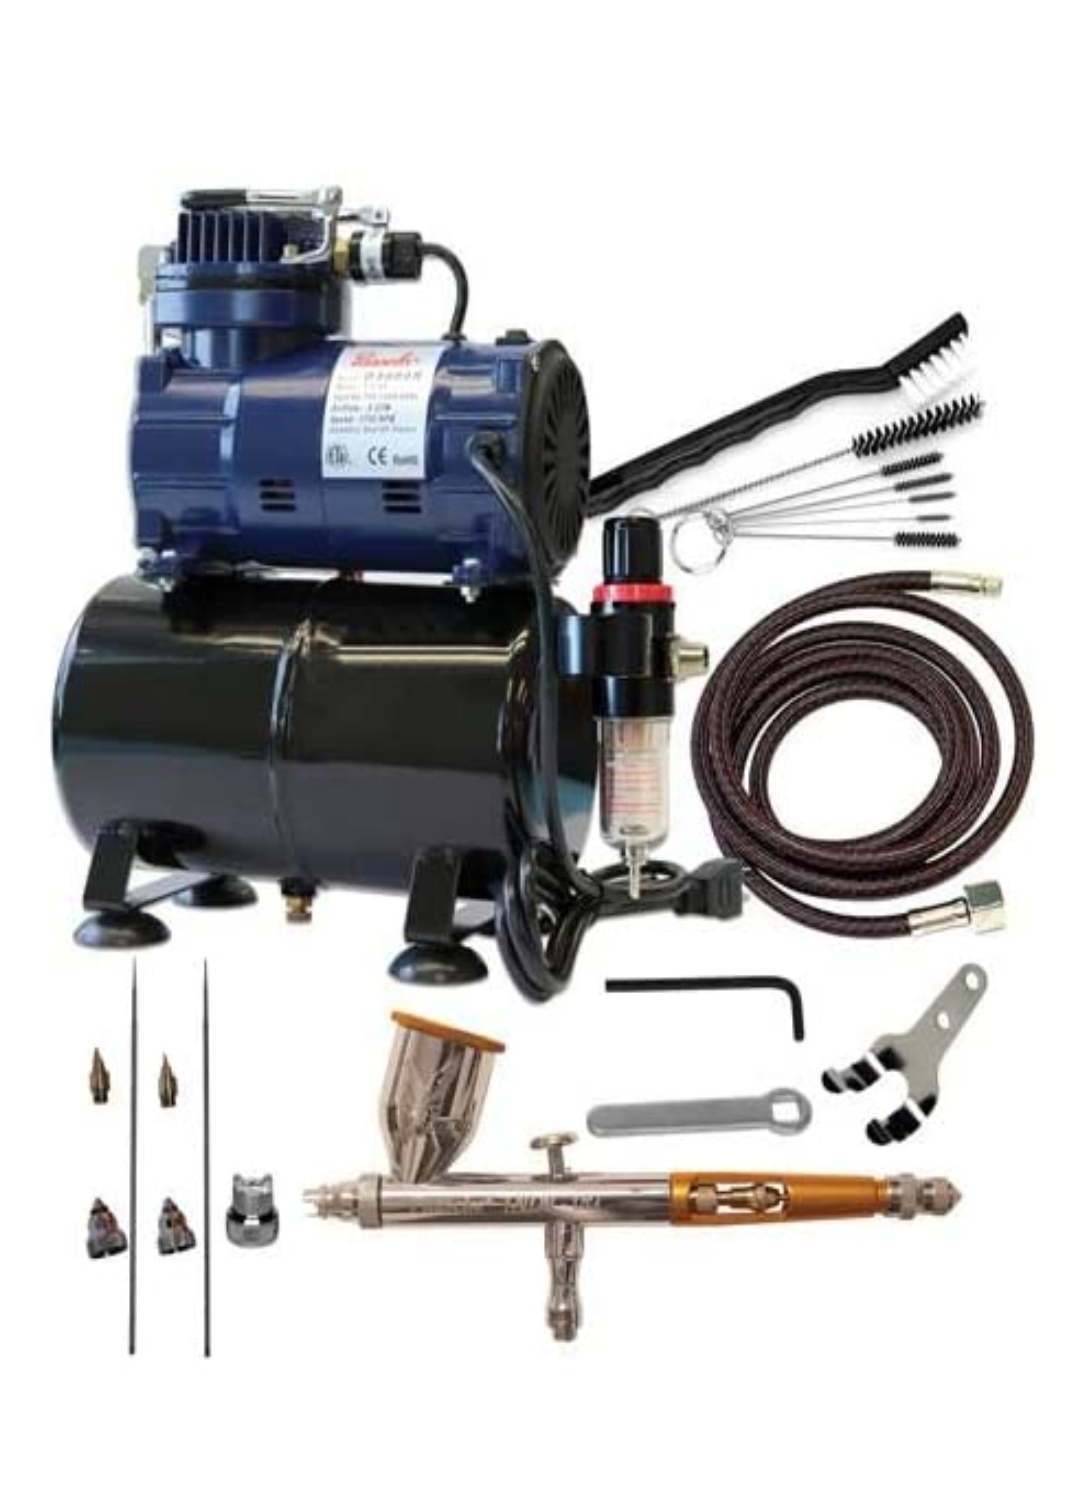 8 Siphon Feed Airbrushes with 4 Cylinder Piston Air Compressor